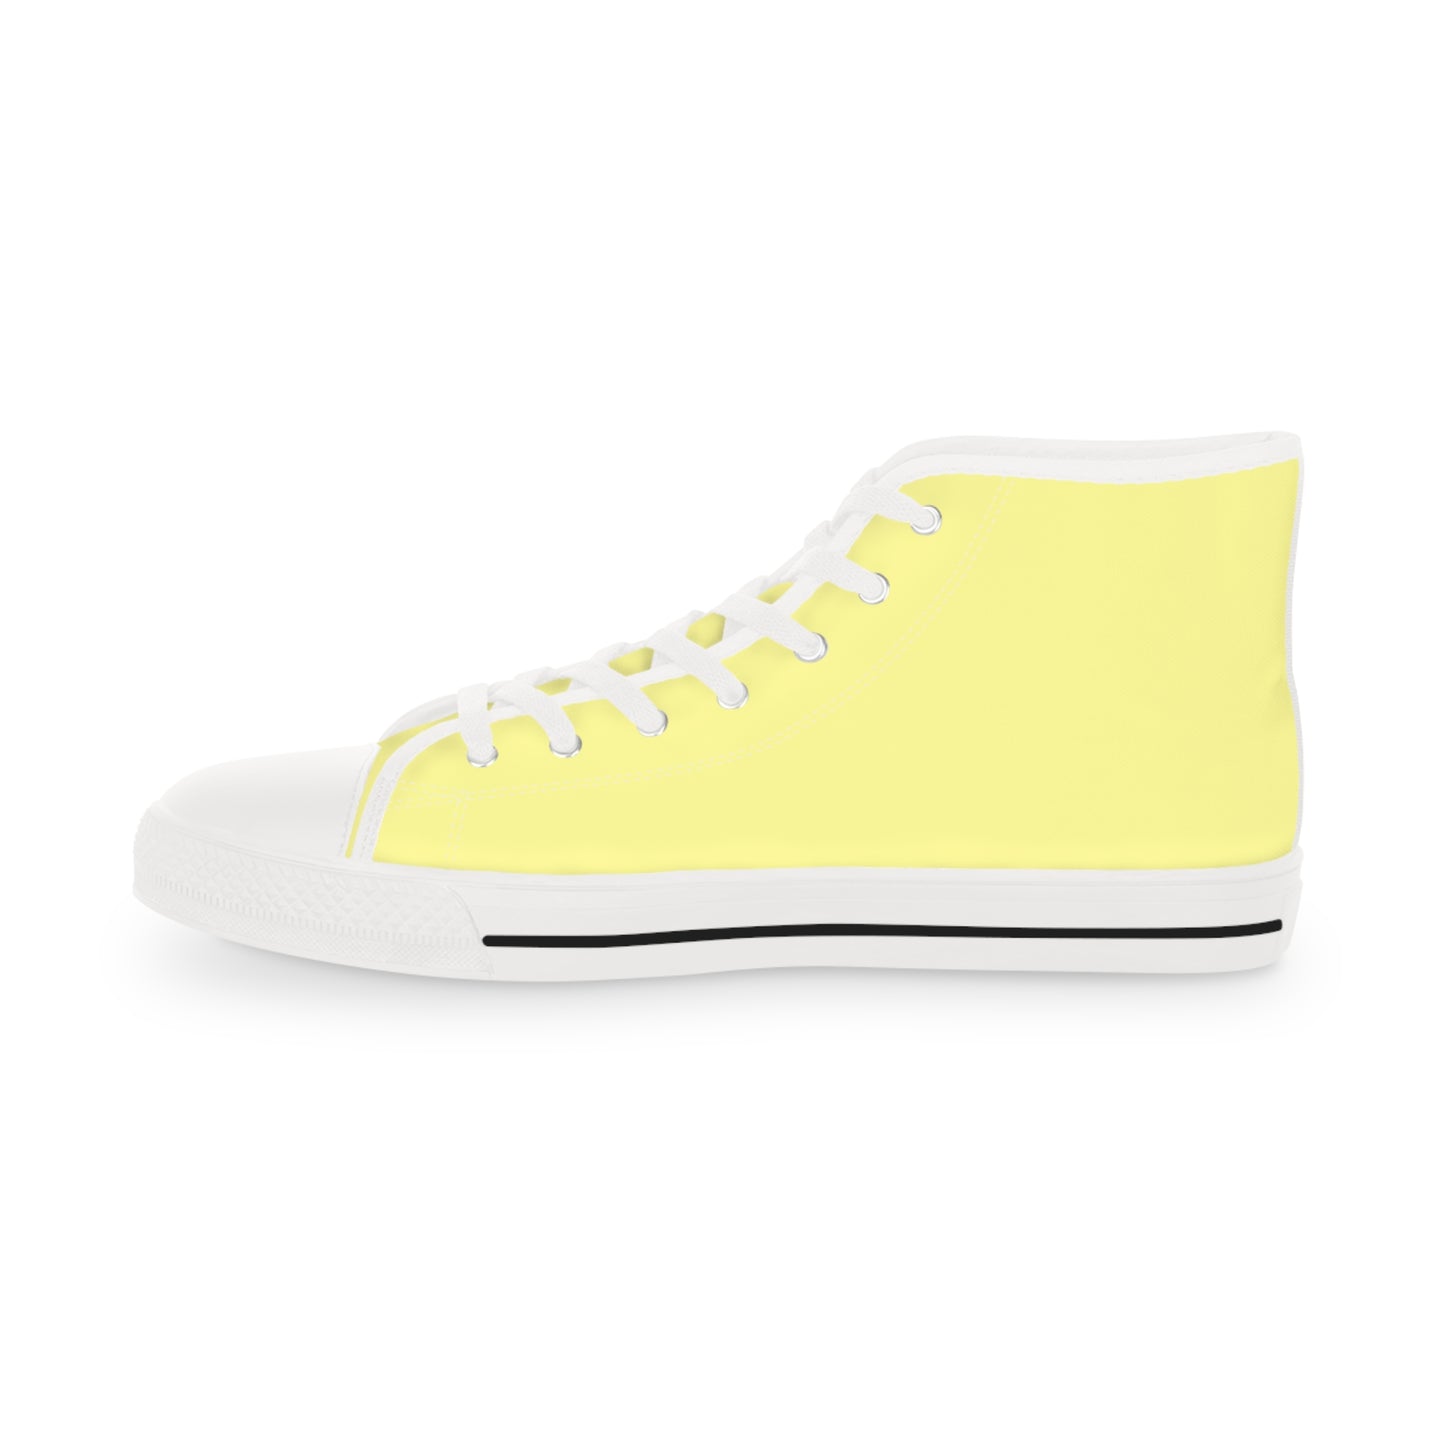 Men's Canvas High Top Solid Color Sneakers - Lemon Yellow US 14 White sole